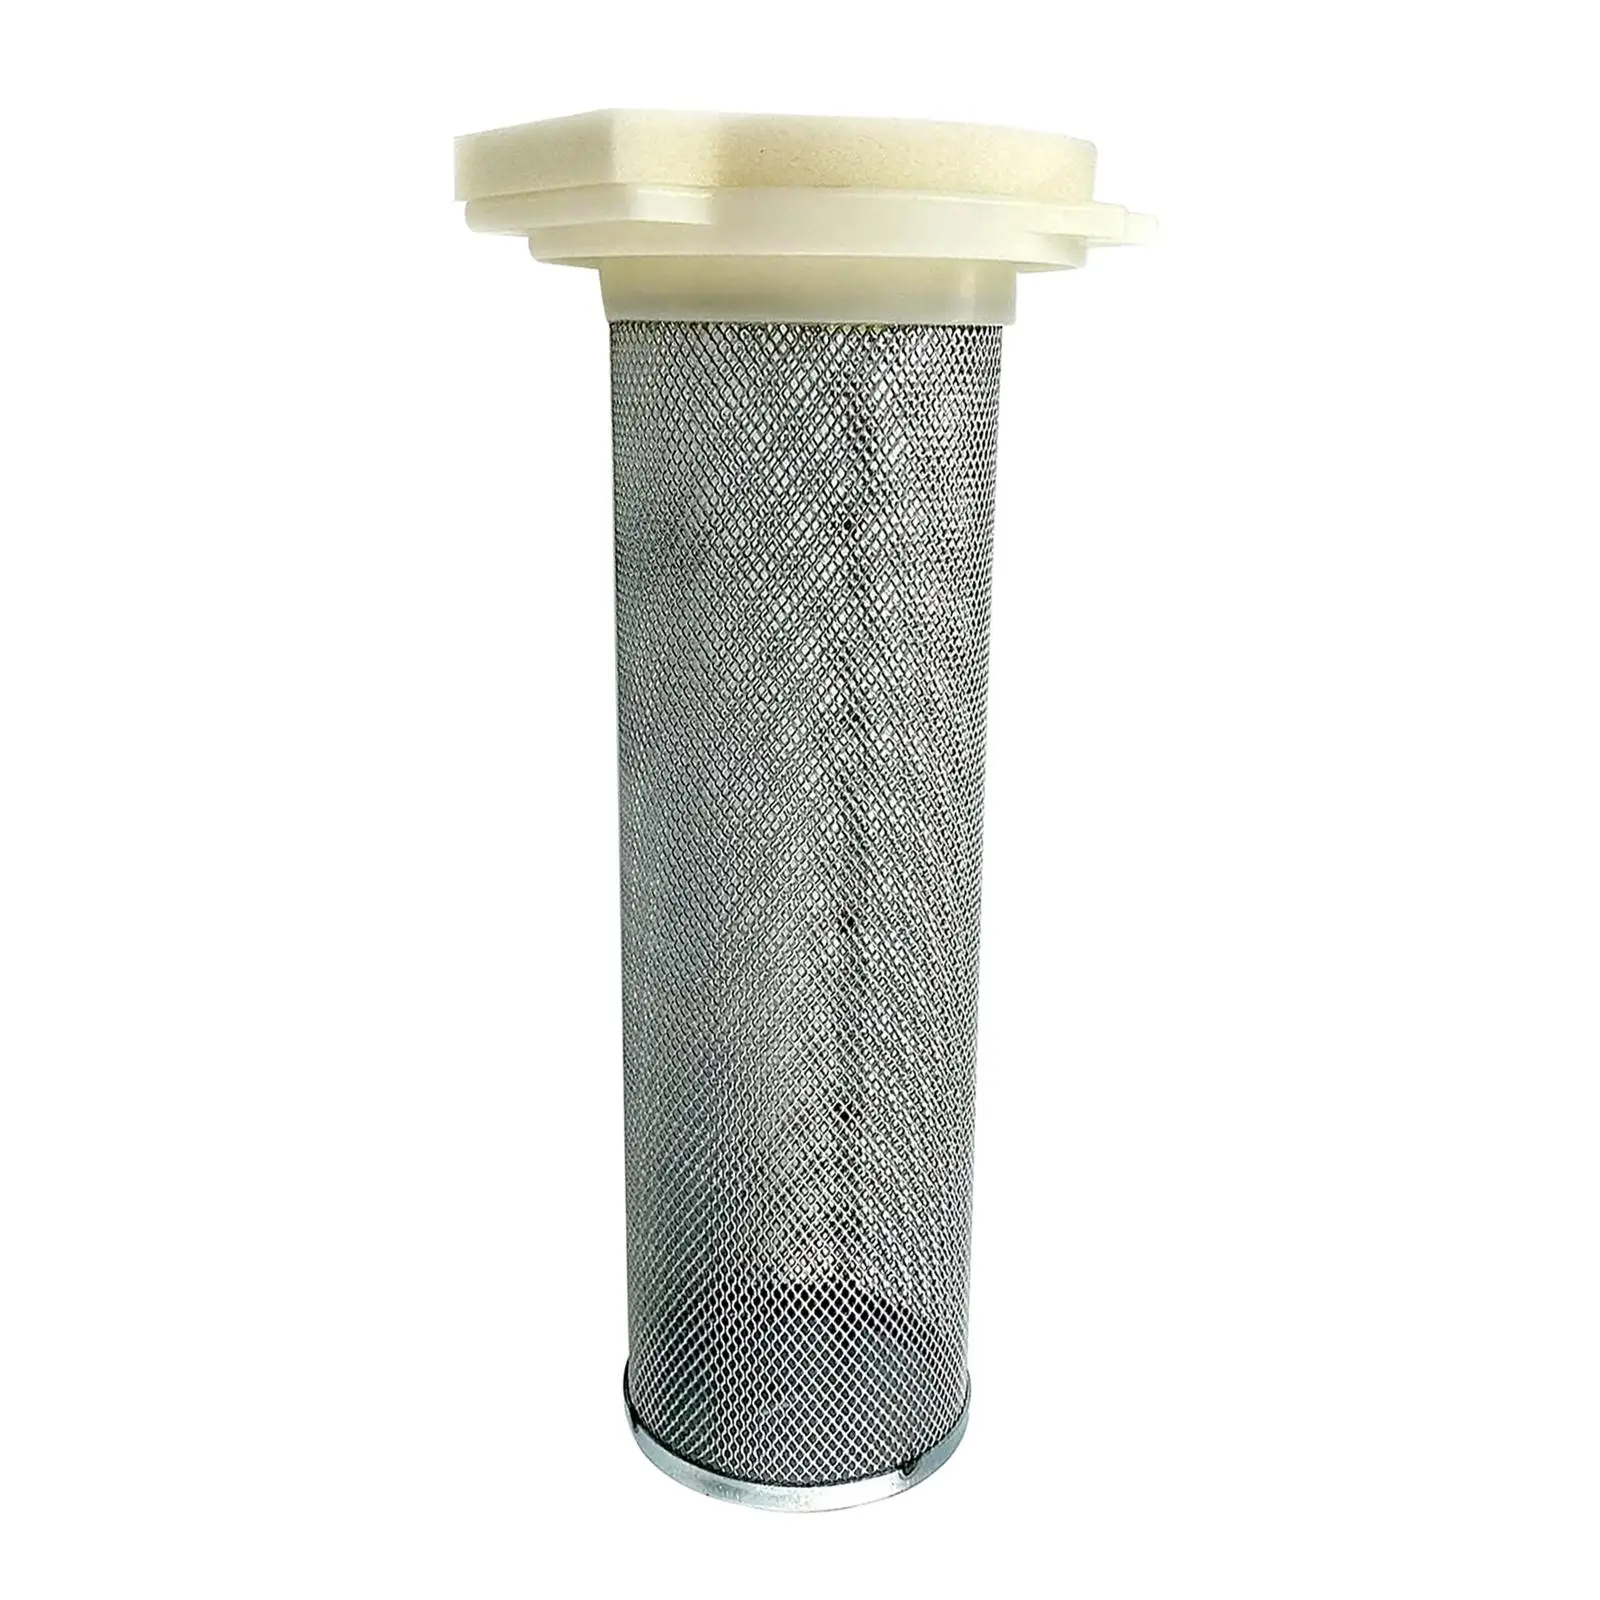 Intake Valve Air Filter Cage for Yamaha Yfm 350 Accessories Replacement